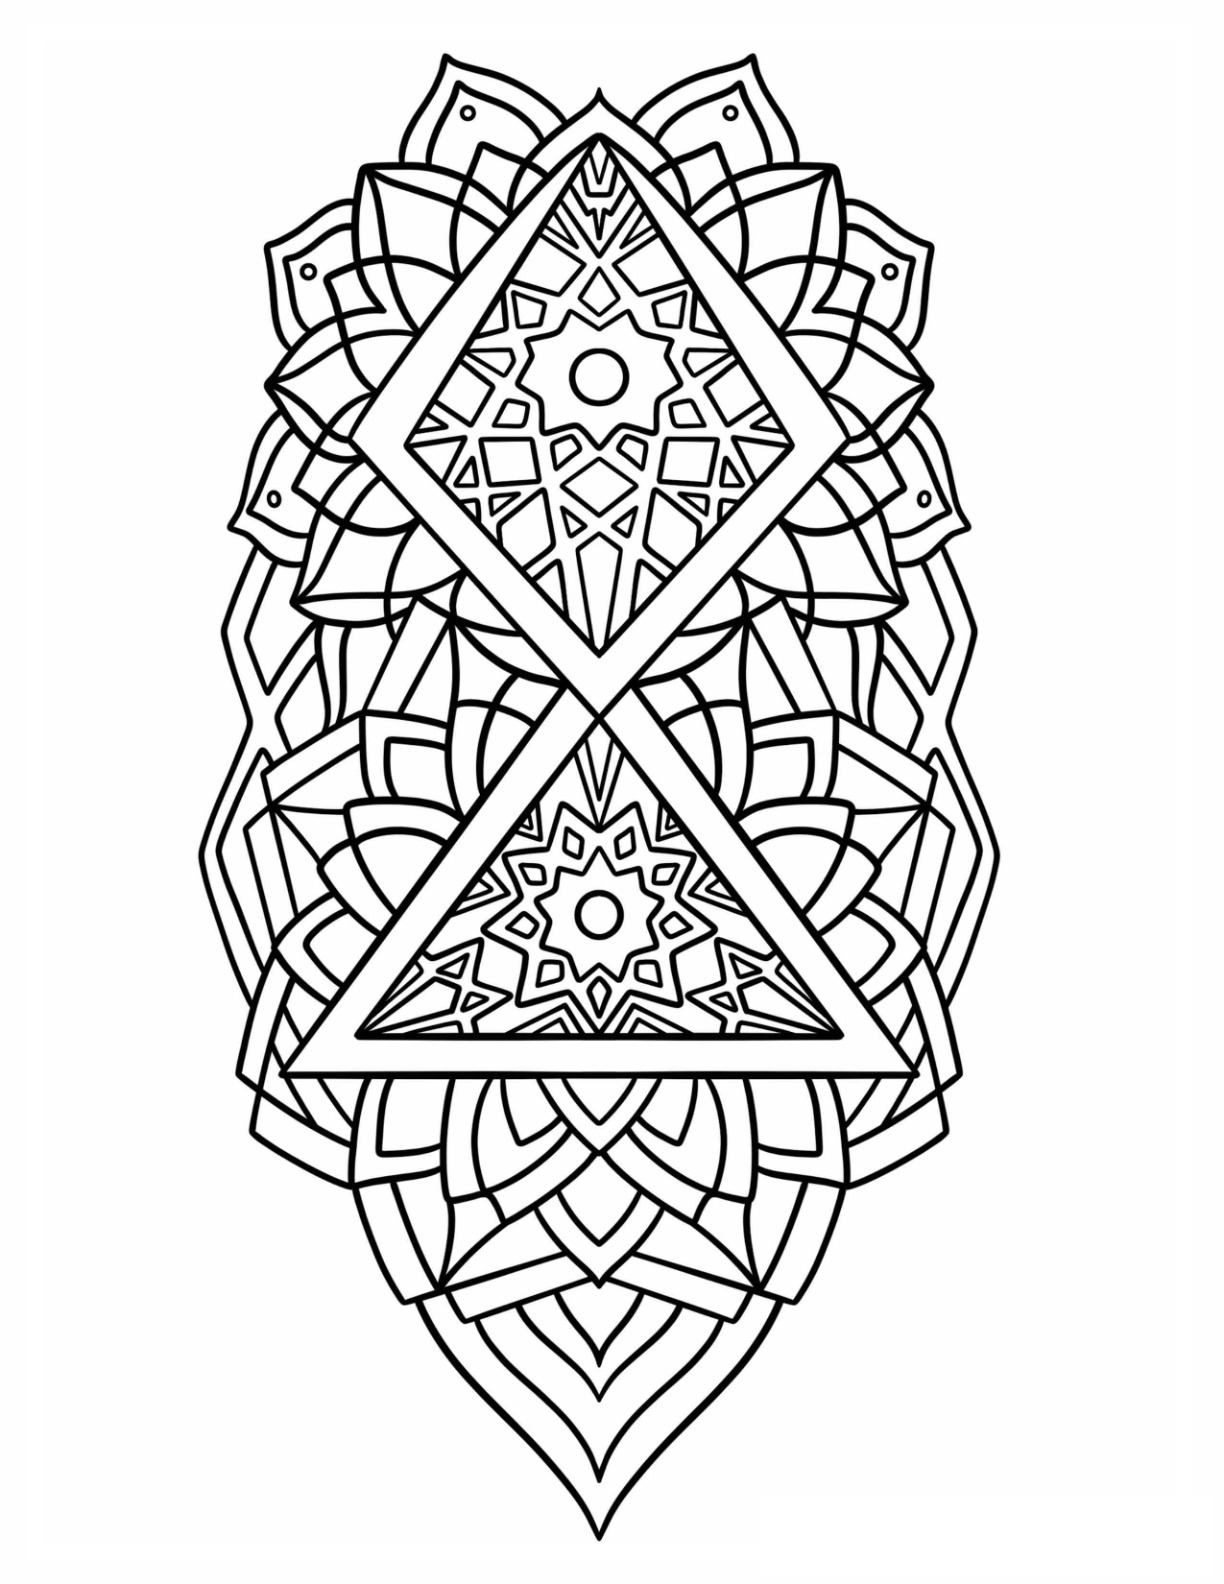 Geometric coloring pages by coloringpageswk on